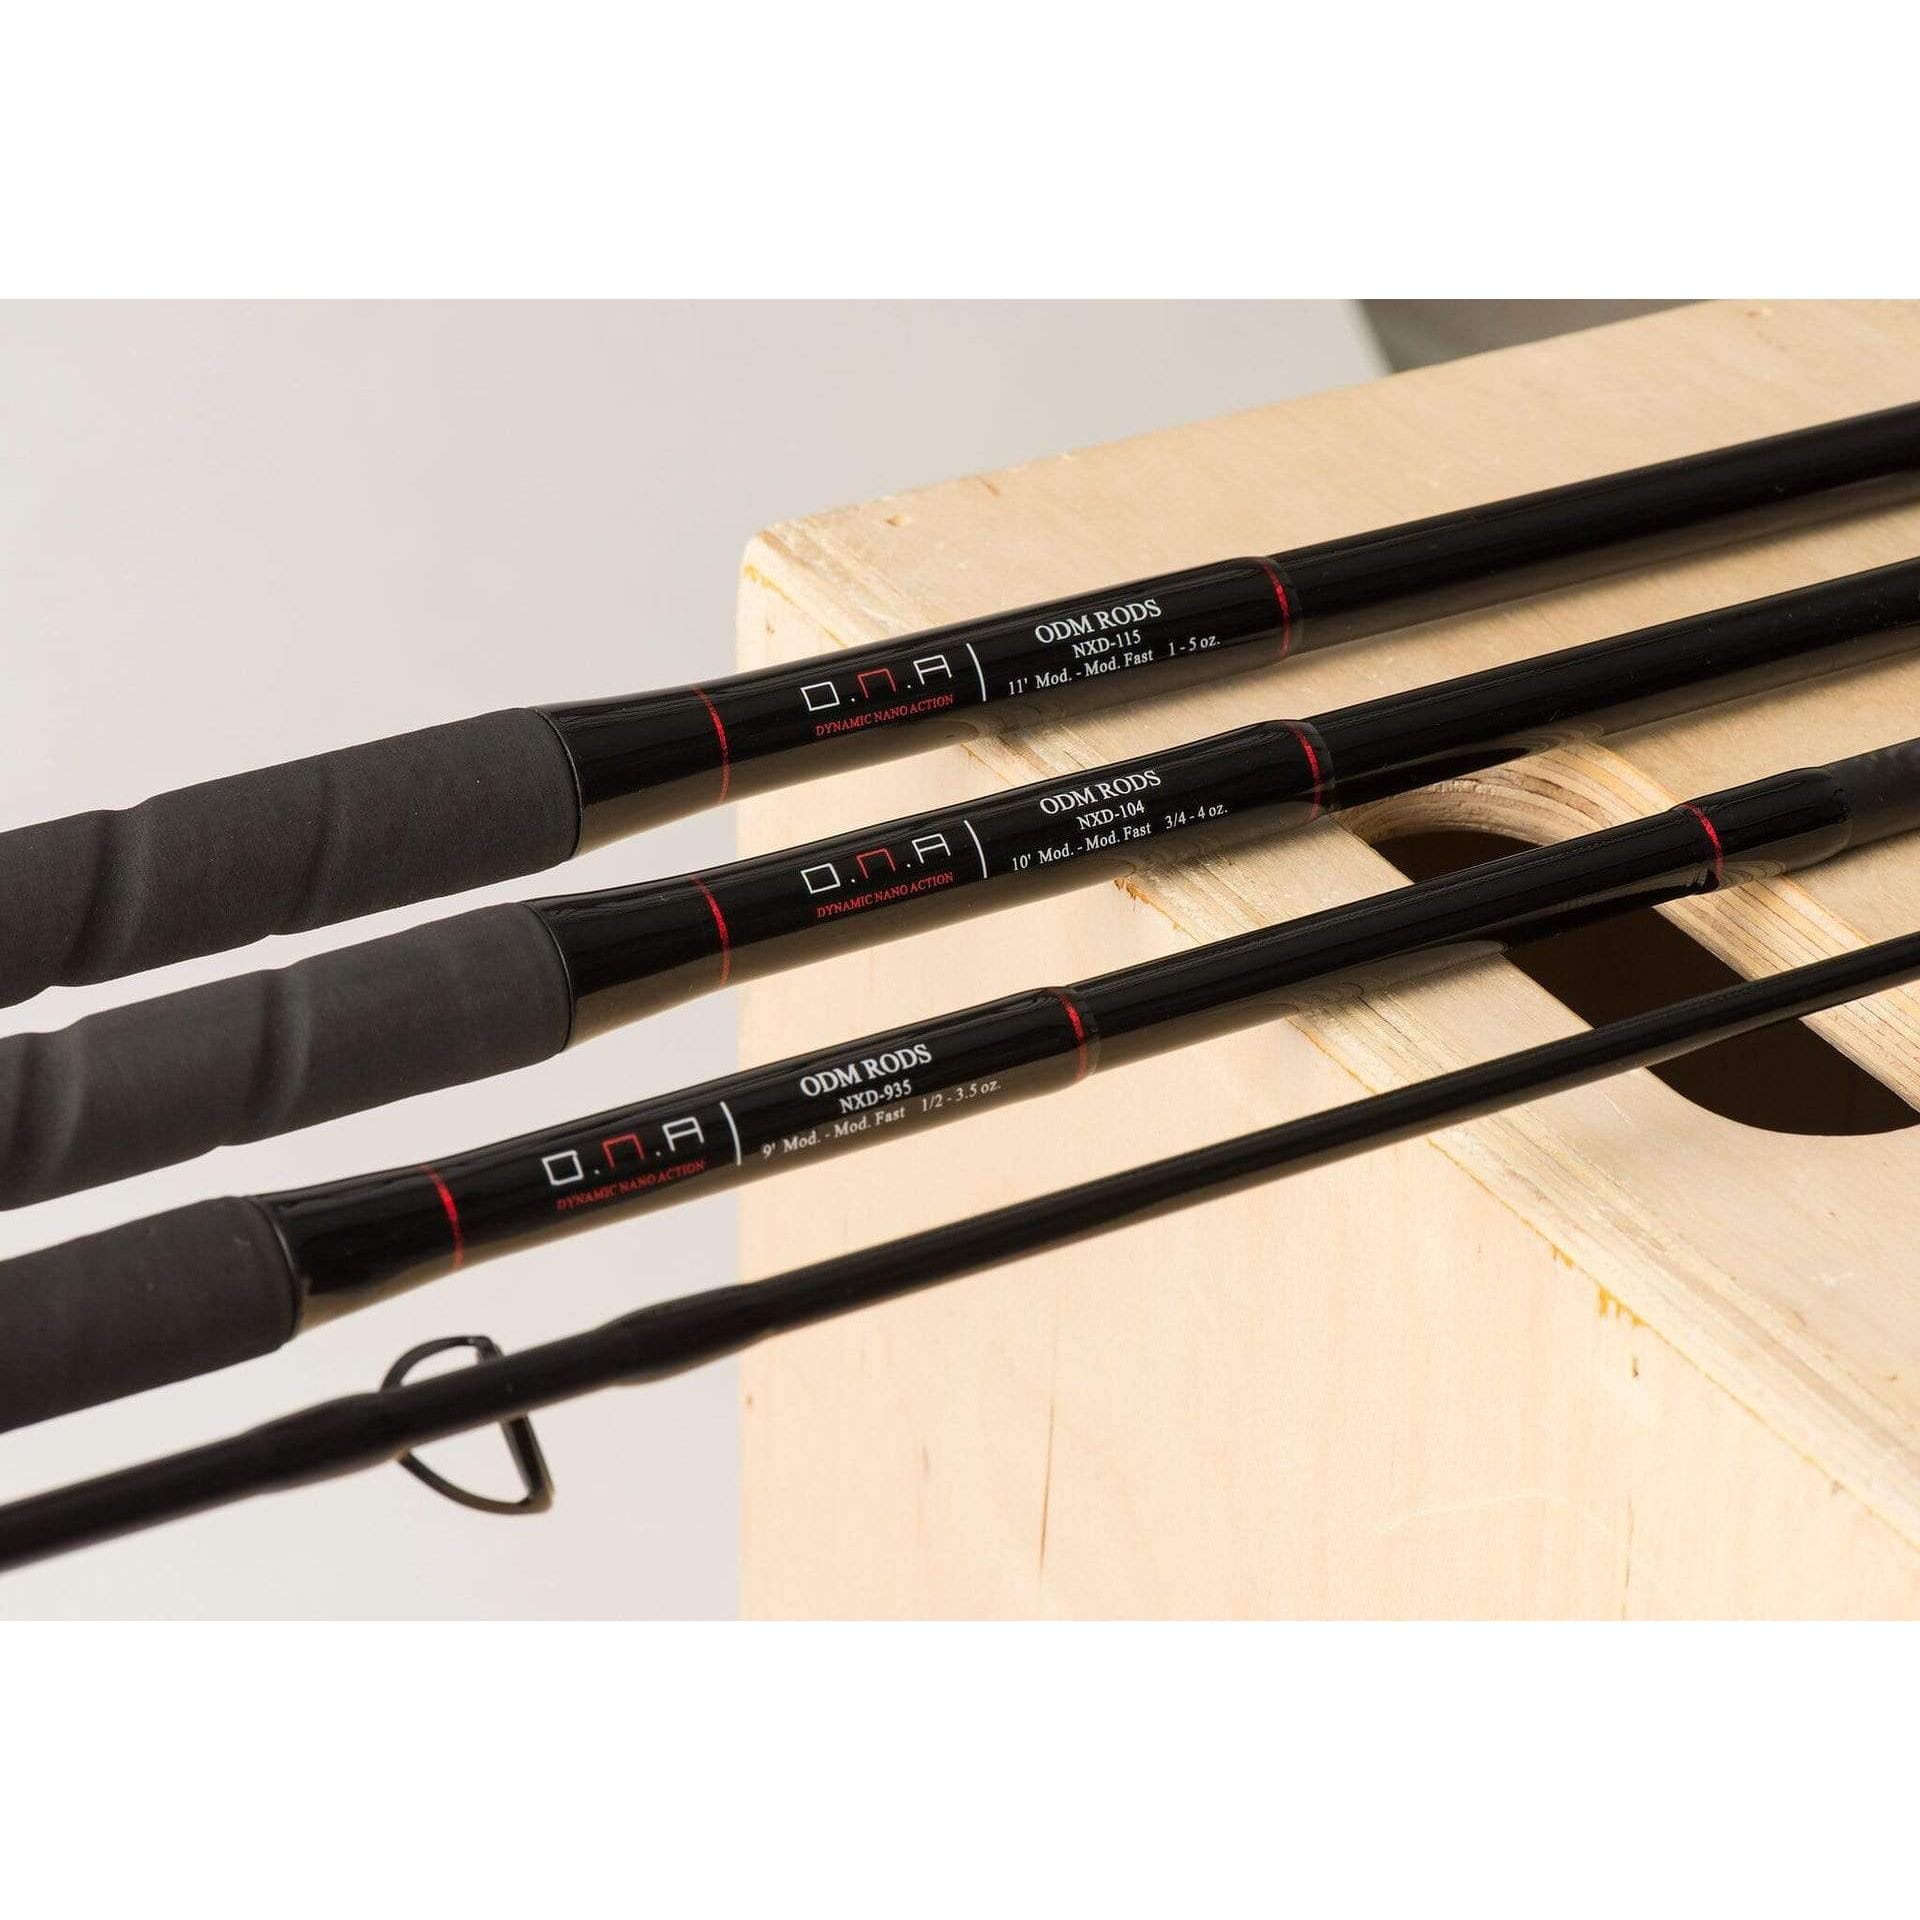 ODM D.N.A. Surf Rods - The Saltwater Edge